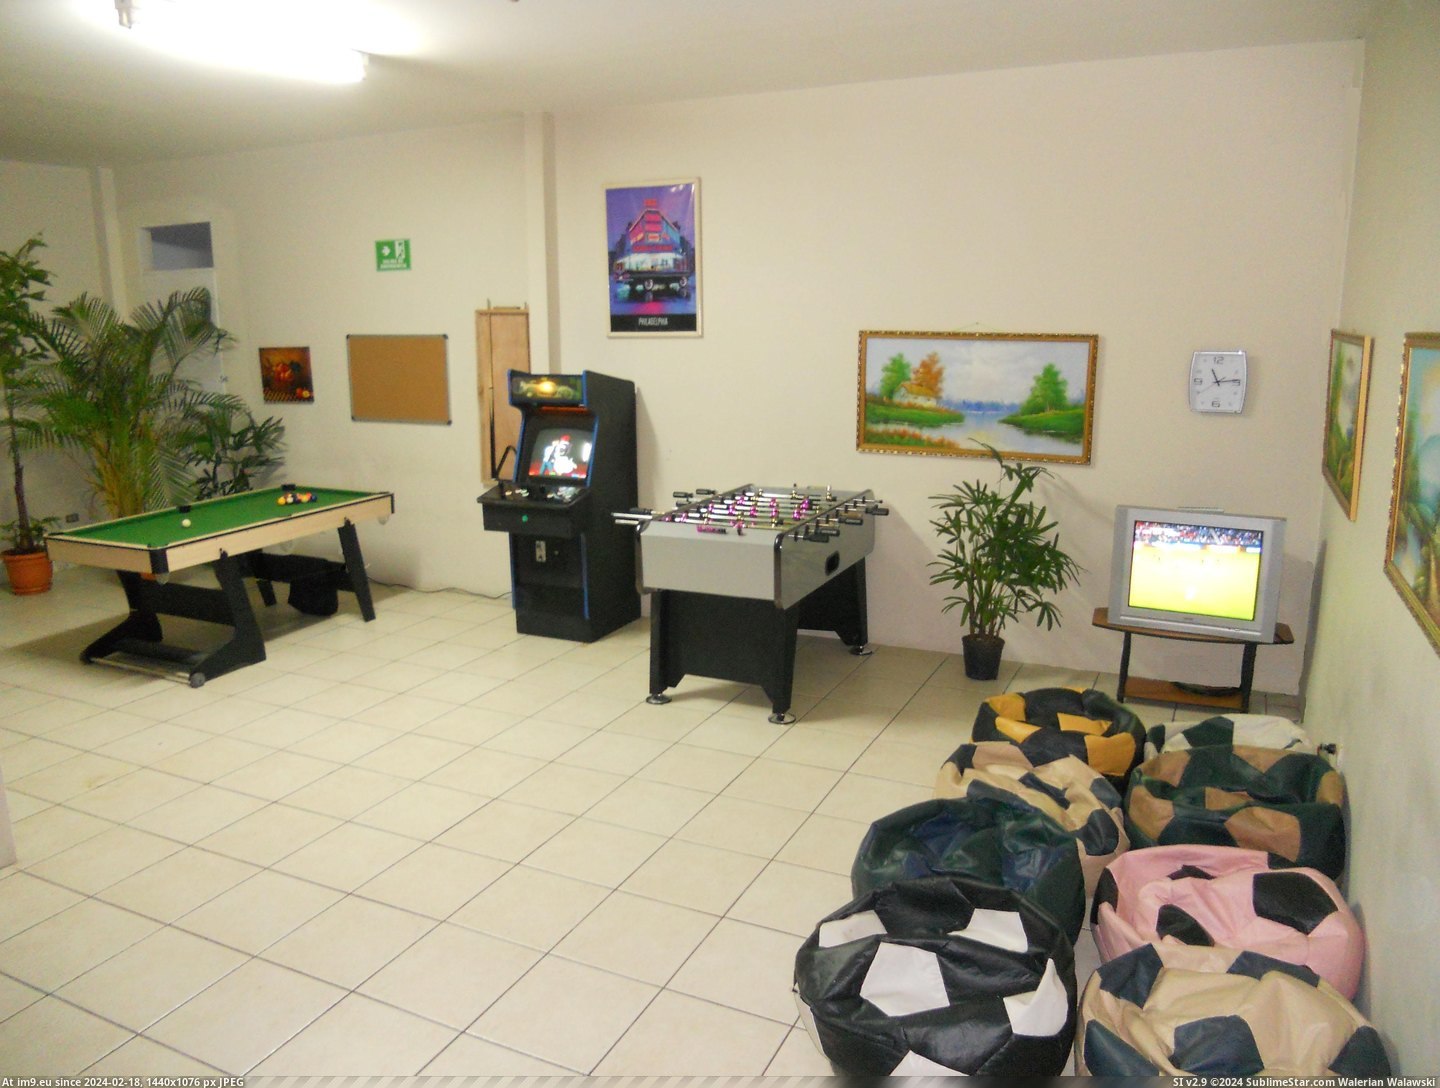 #Game #Designs #Centre #Room CONTACT CENTRE GAME ROOM DESIGNS 2010 Pic. (Изображение из альбом BEST BOSS SUPPORTS EMPLOYEE GAME ROOM VIDEO ARCADE))